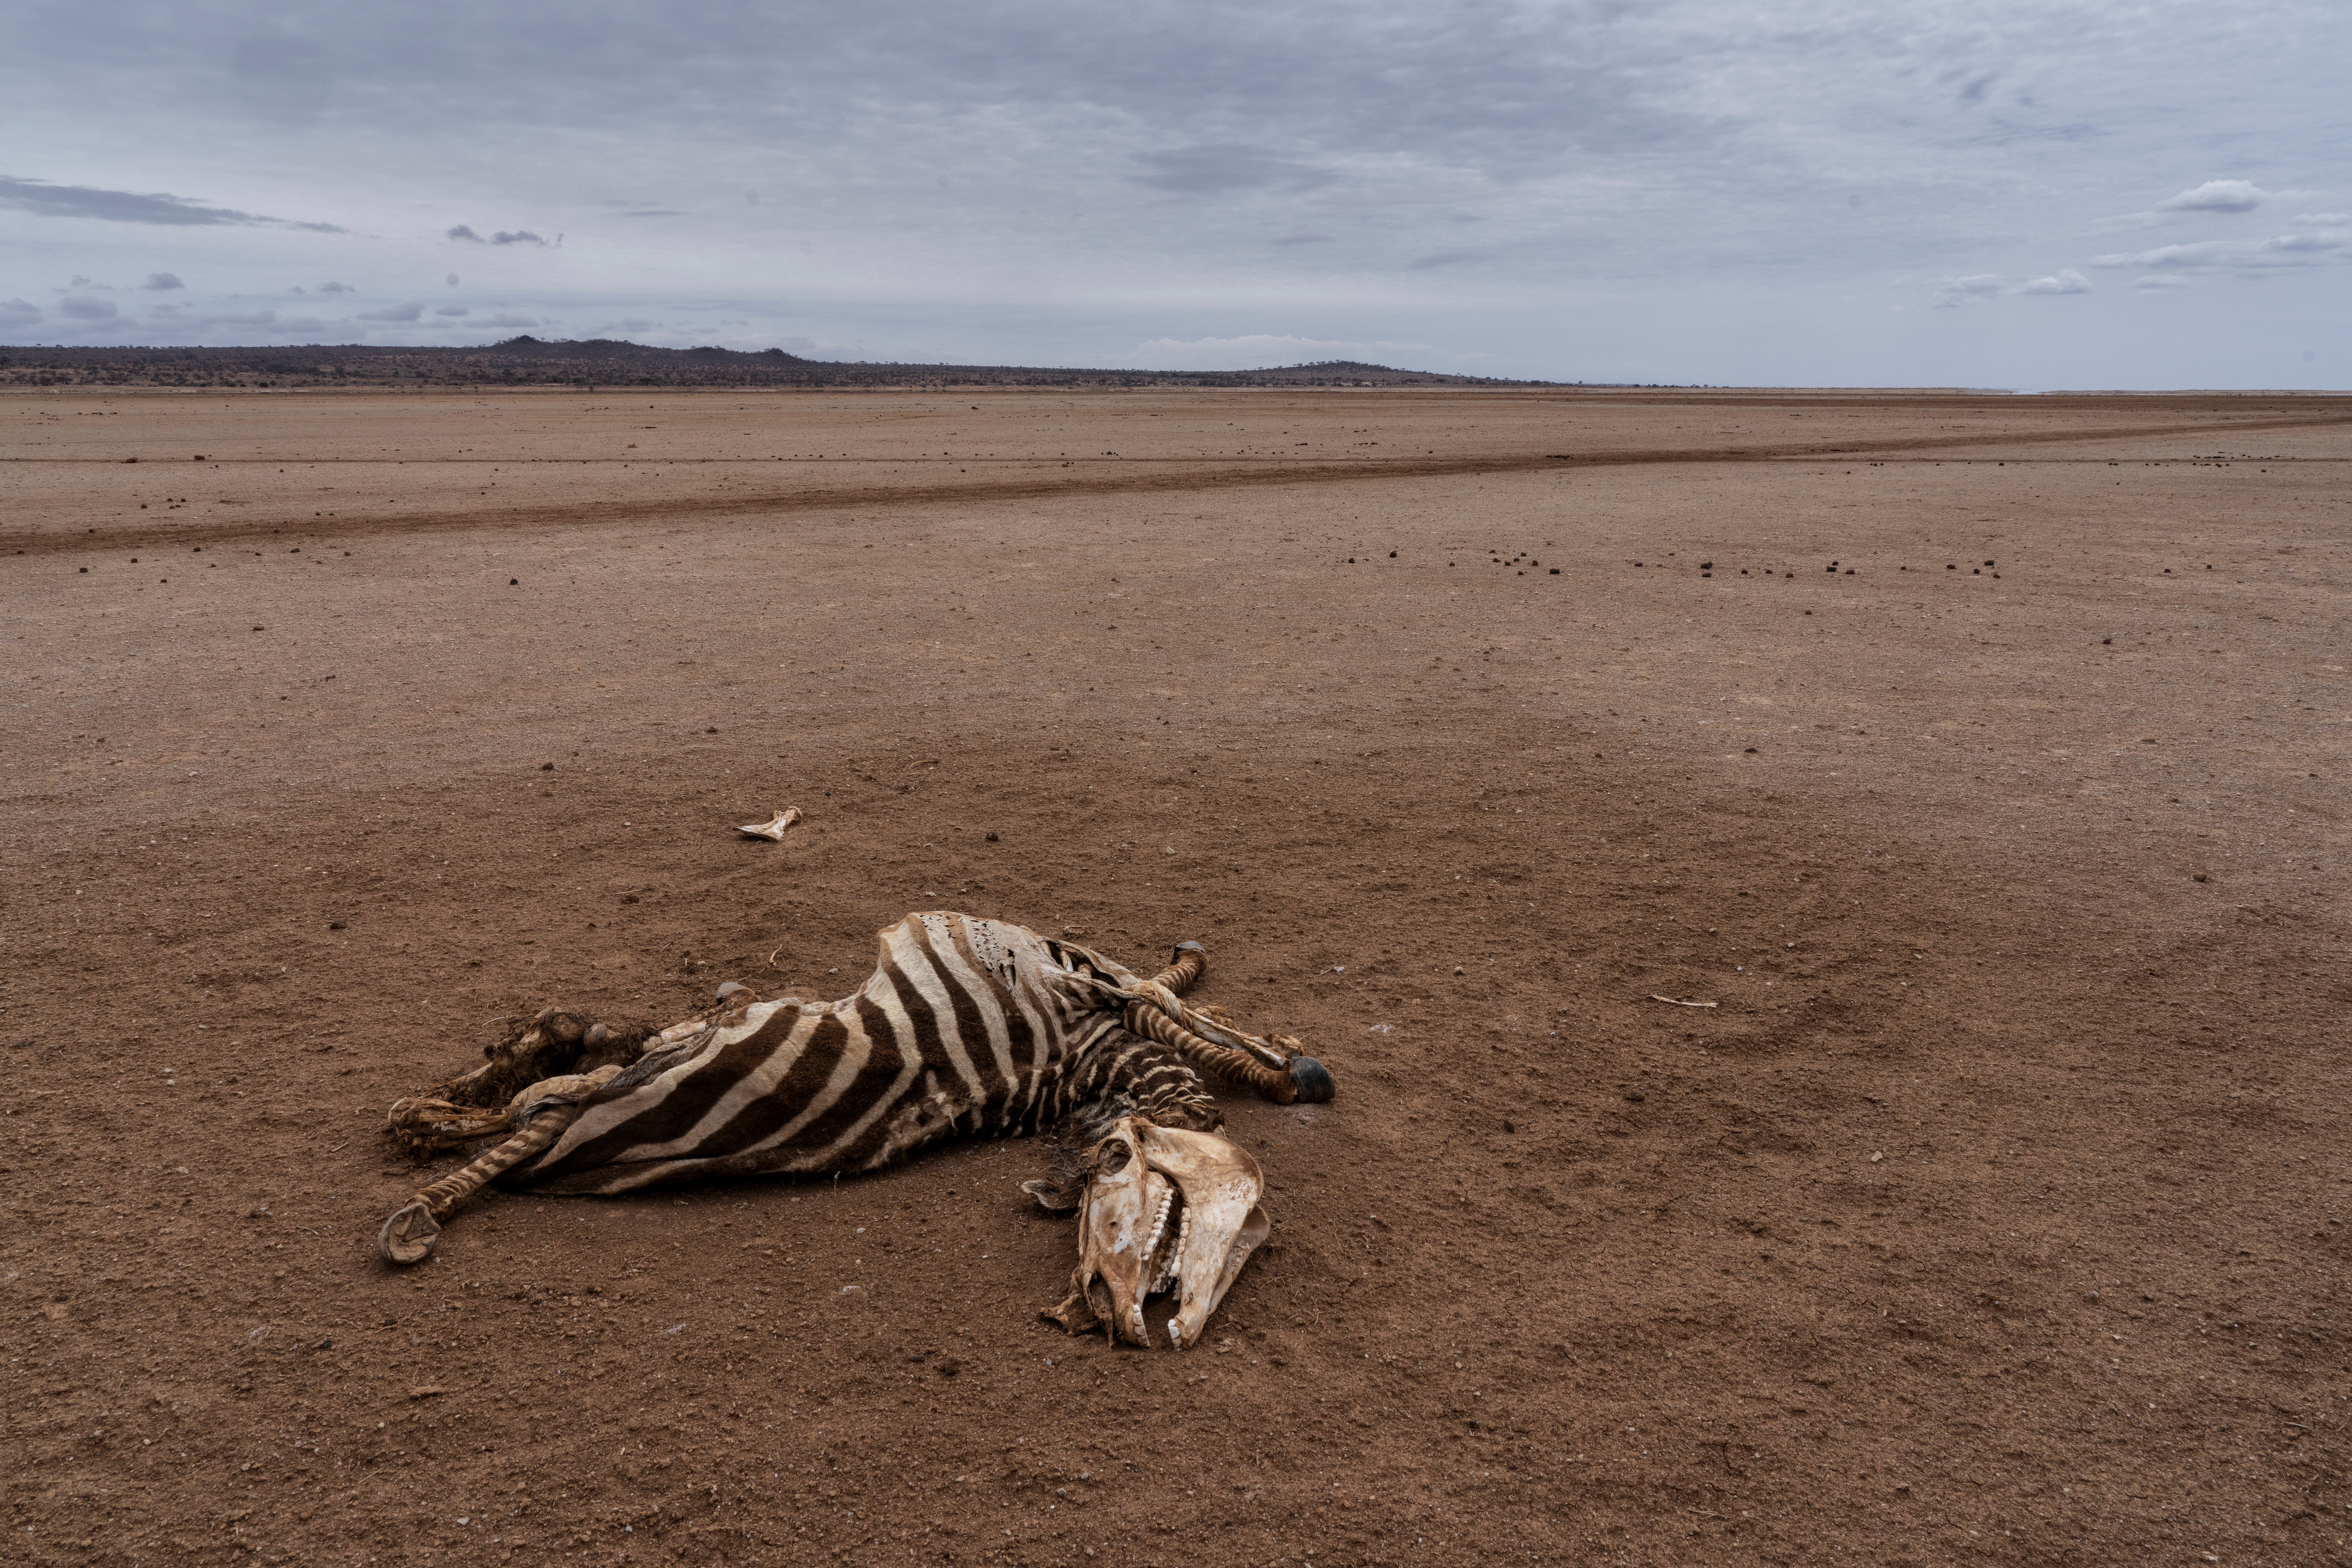 The carcass of a zebra near Kimana in southern Kenya. Access to water for drinking is not so much the issue - lack of rain has meant there is almost nothing for the animals to eat